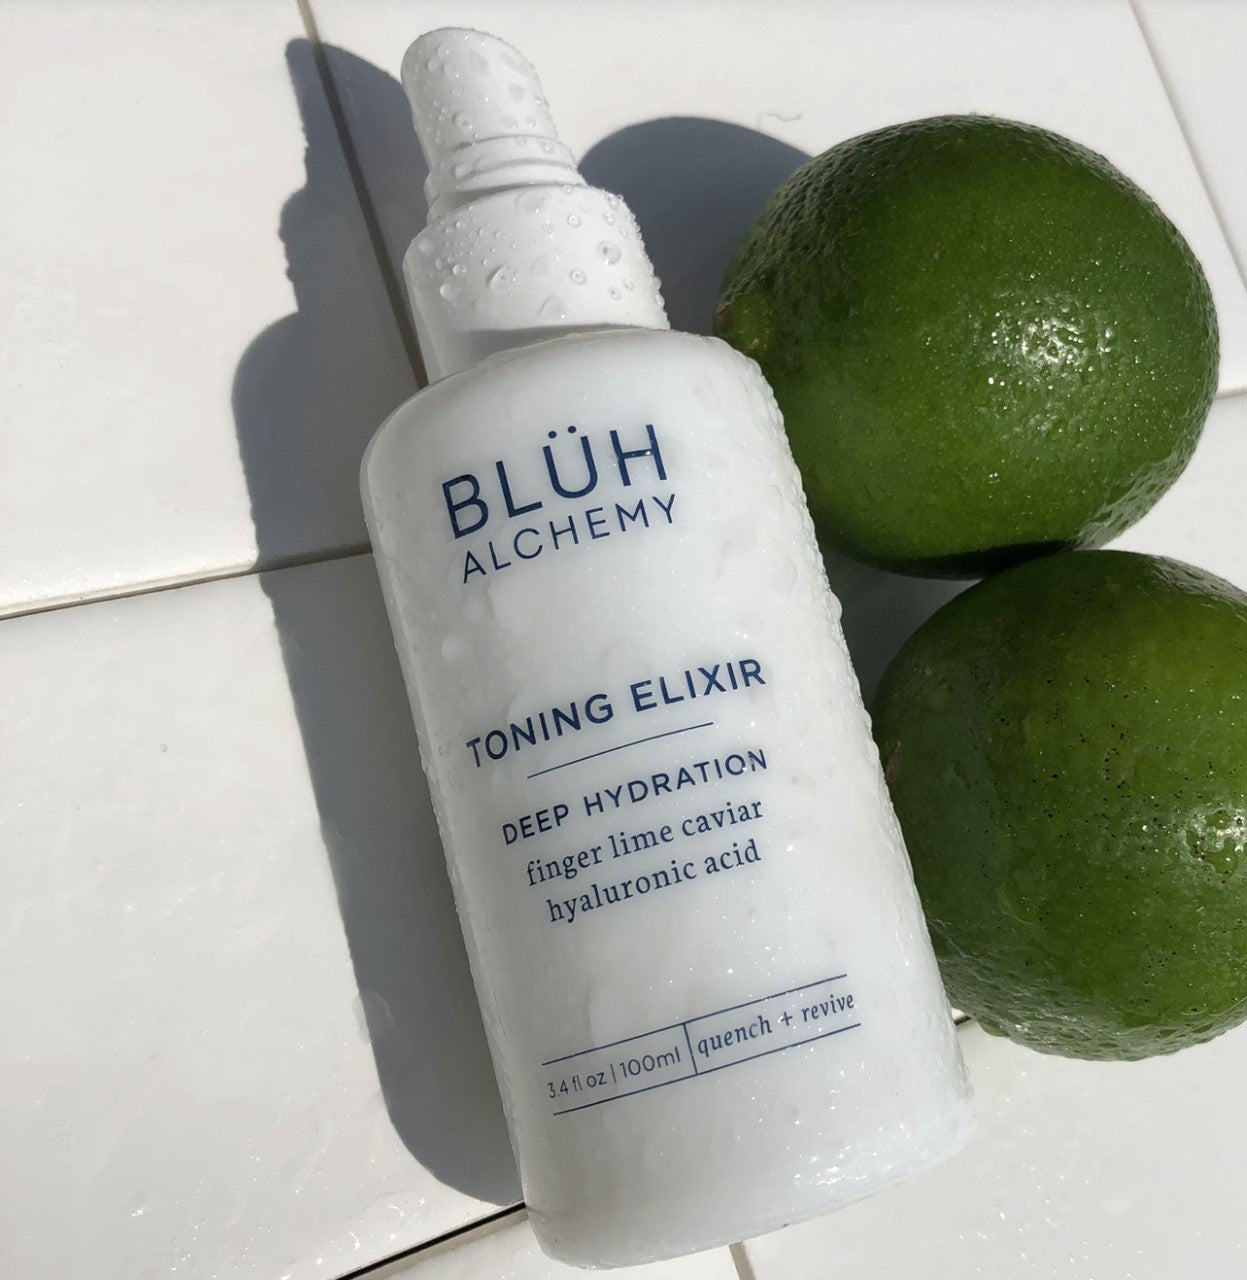 Blue Alchemy - Toning Elixir With Fruits